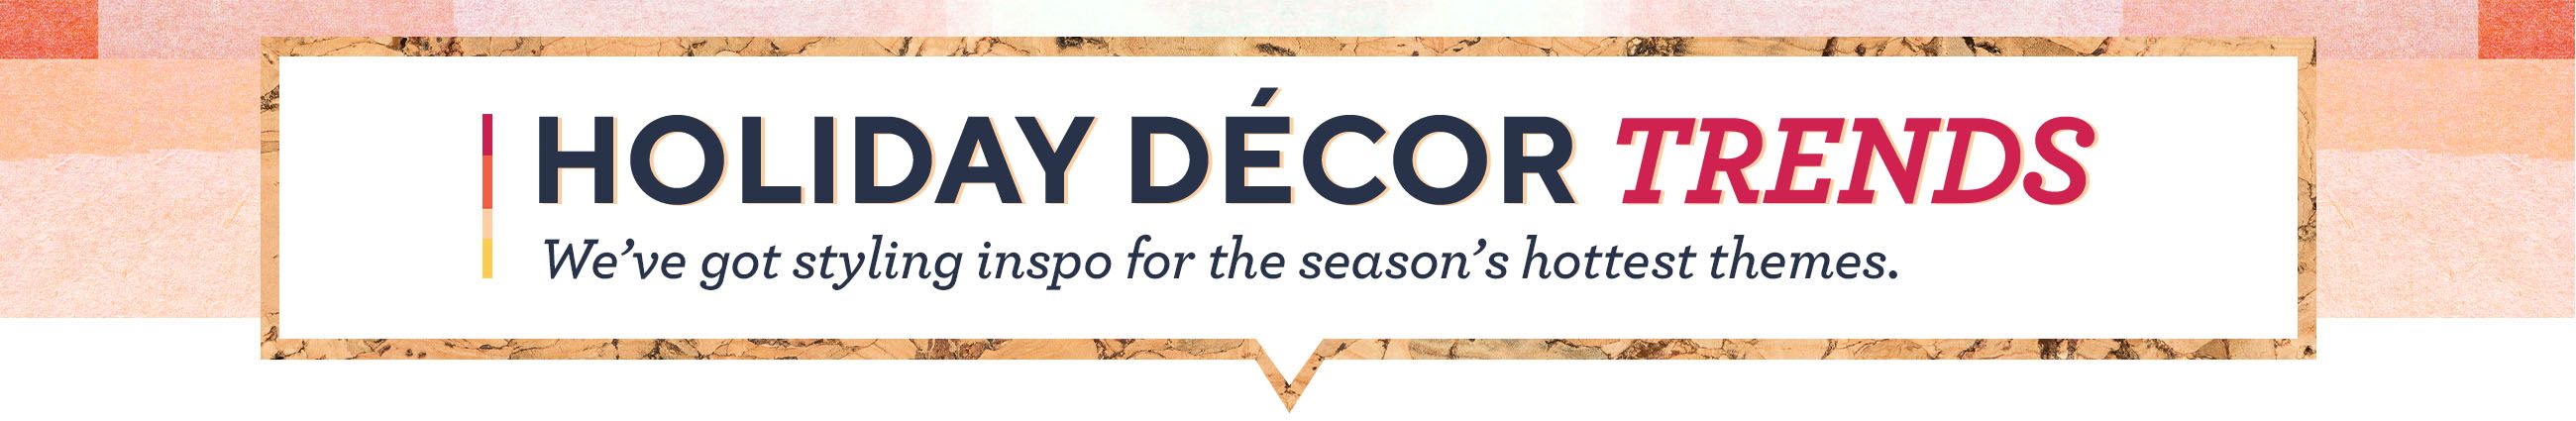 Holiday Décor Trends.  We've got styling inspo for the season's hottest themes.